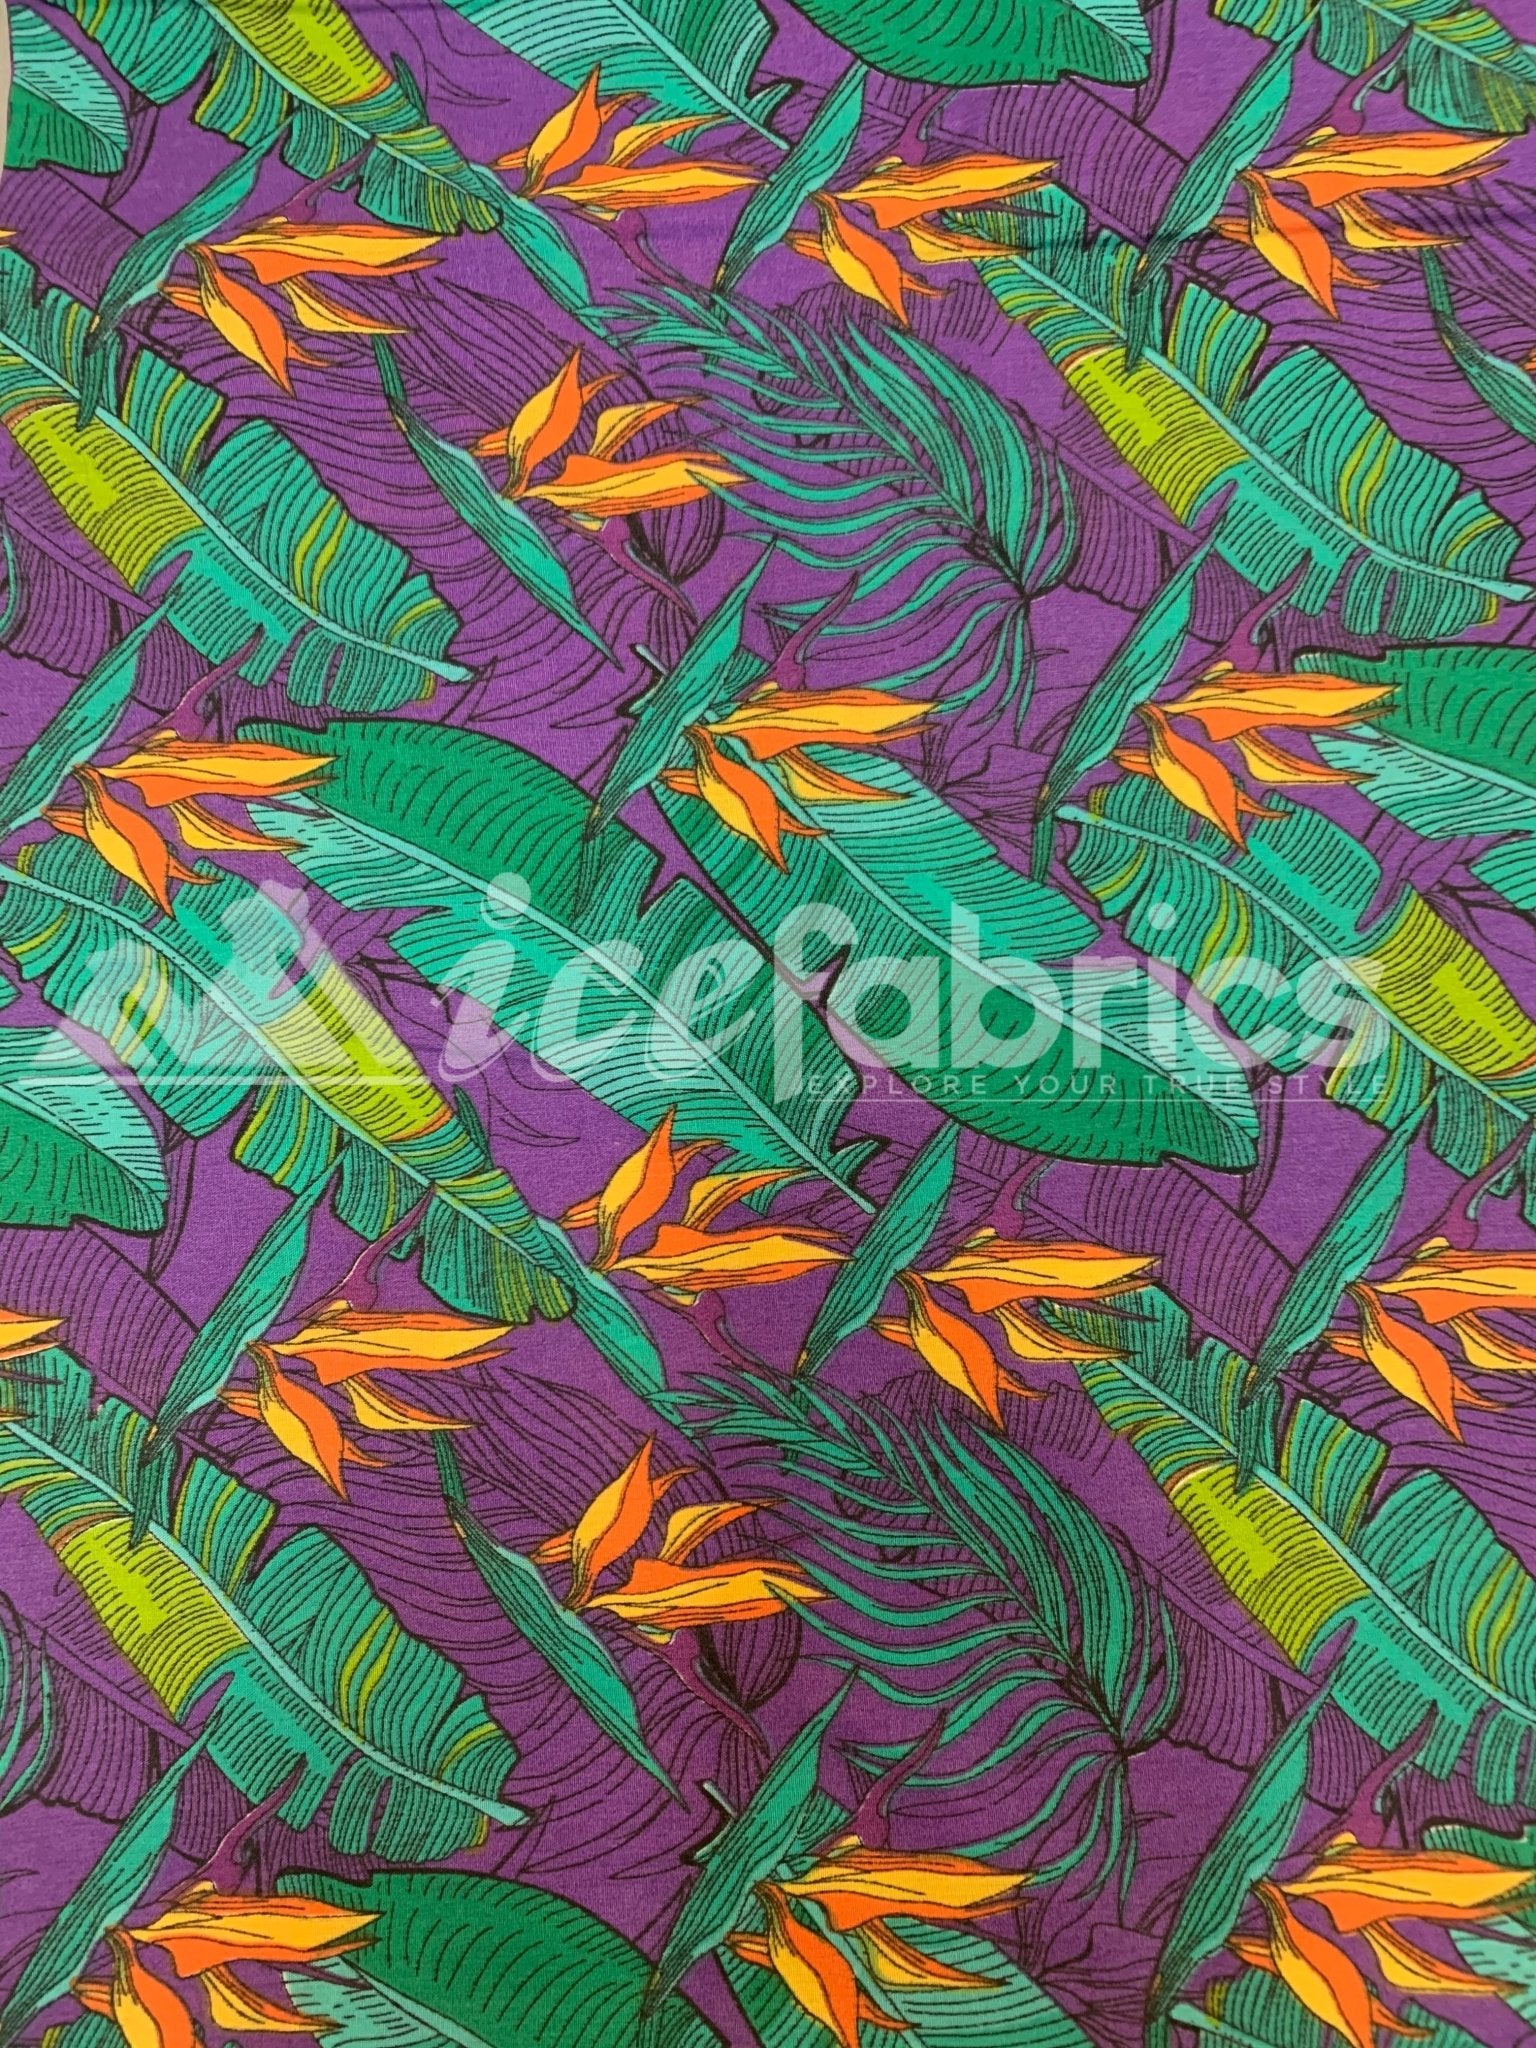 Fashion Fabric Leaf Print Poly Cotton Fabric By The Yard (Red, Purple, Blue)Cotton FabricICEFABRICICE FABRICSPurpleFashion Fabric Leaf Print Poly Cotton Fabric By The Yard (Red, Purple, Blue) ICEFABRIC Purple